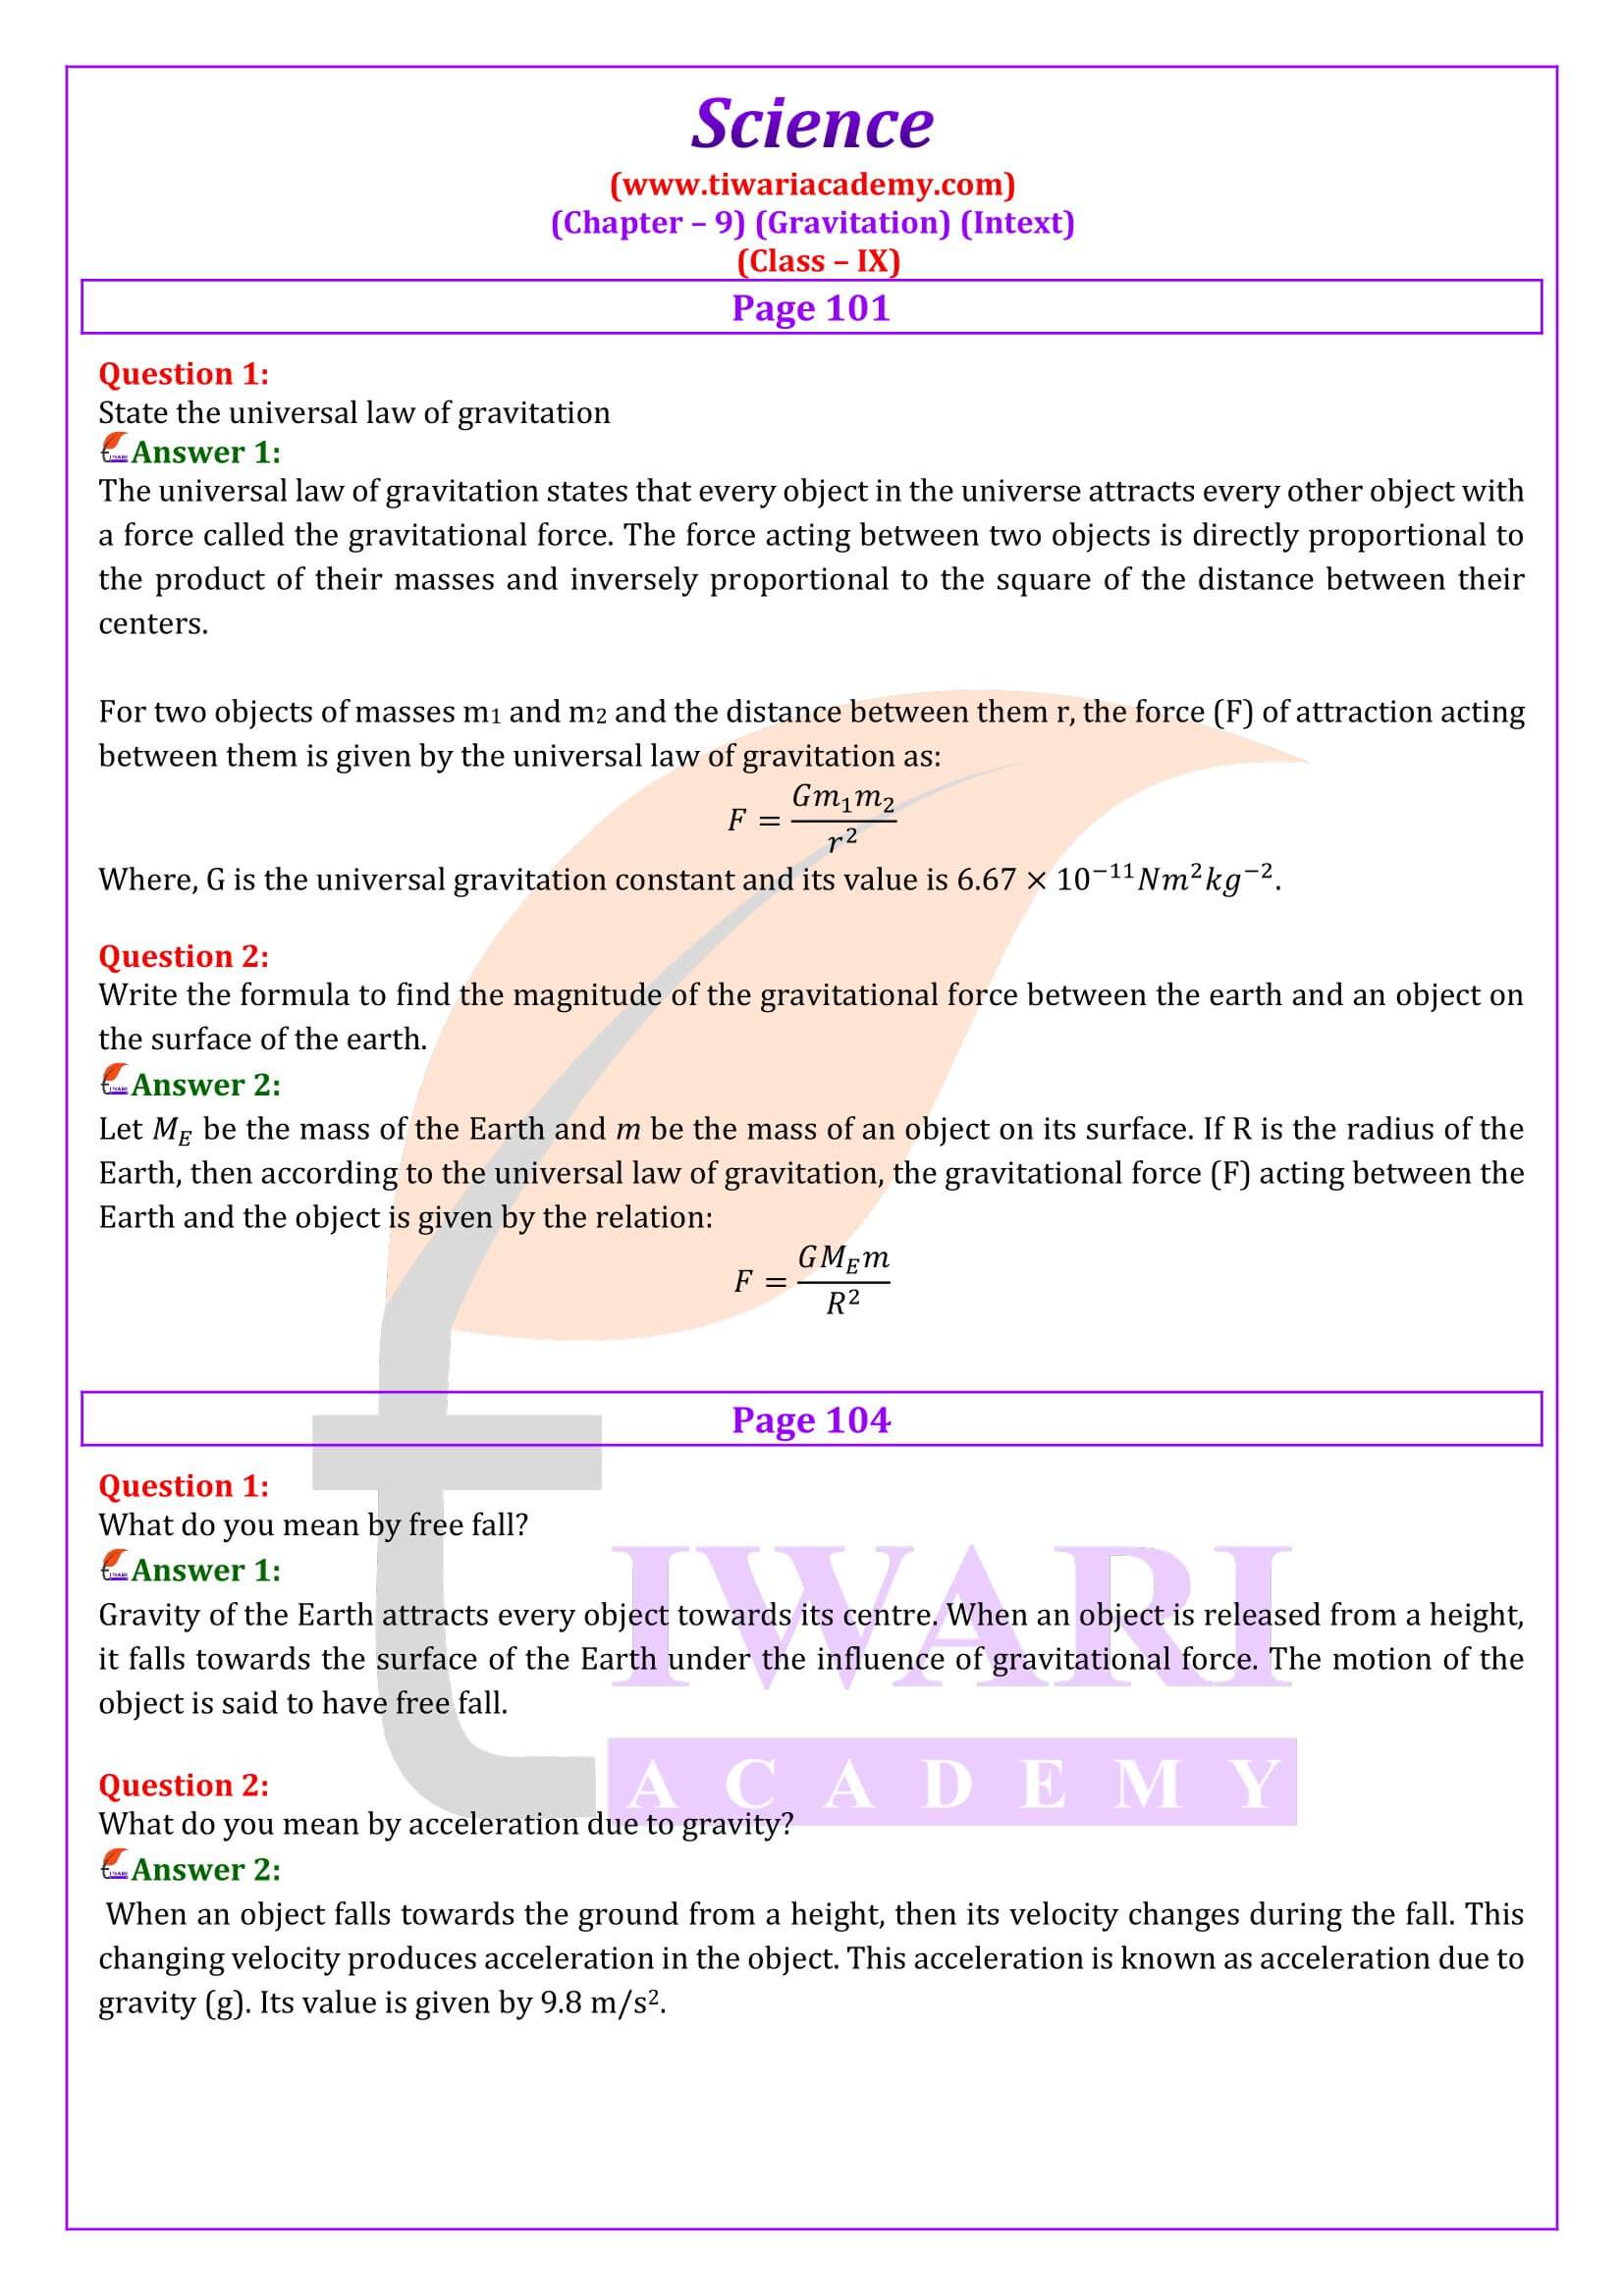 NCERT Solutions for Class 9 Science Chapter 9 Intext Question